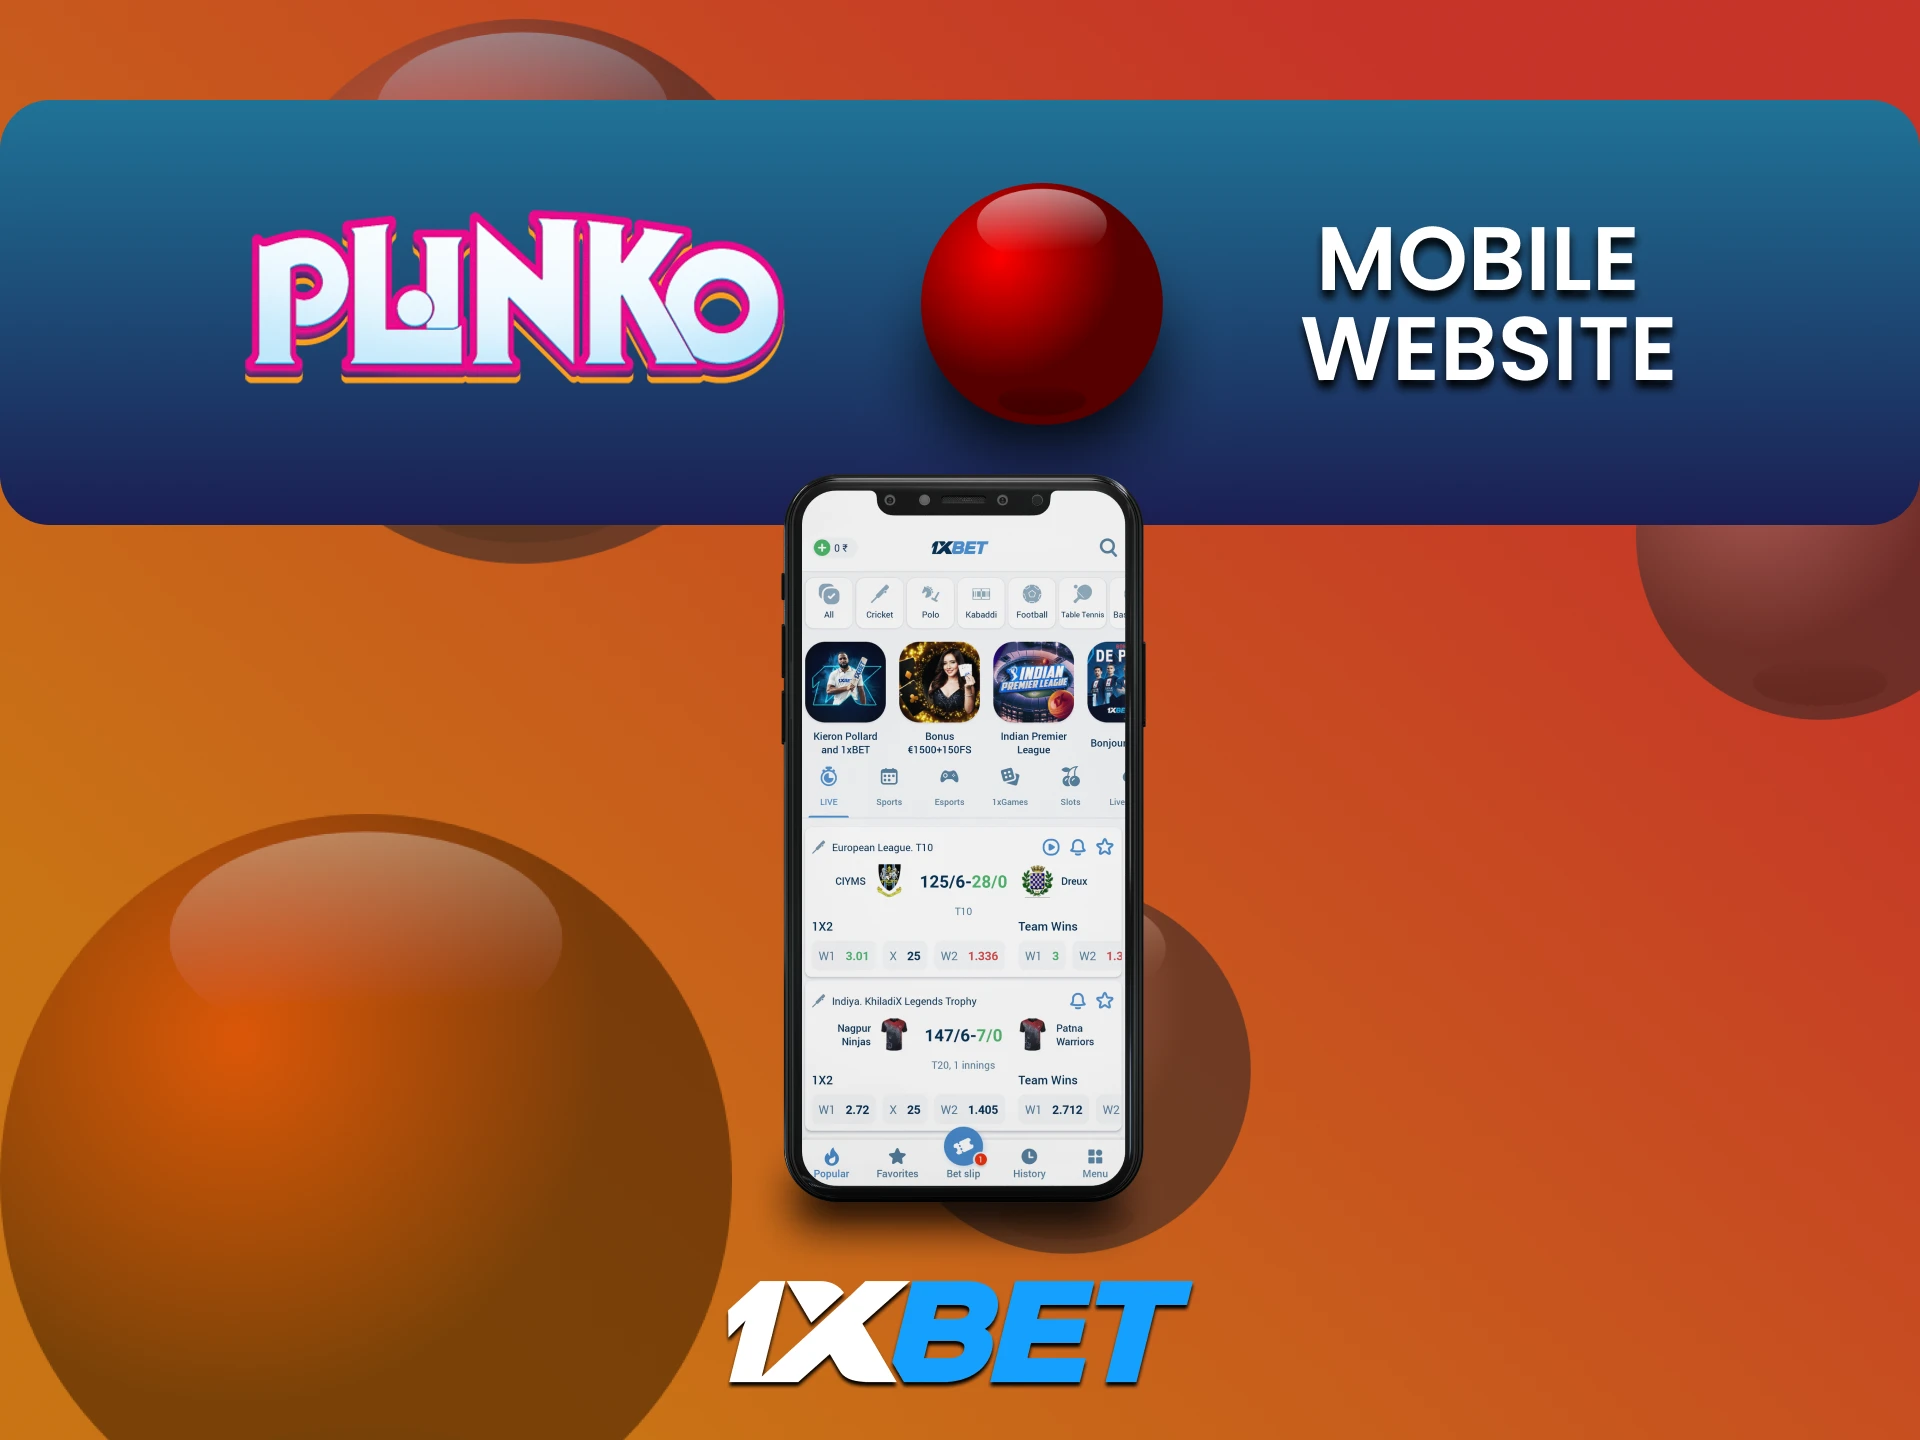 Visit the mobile version of the 1xbet website to play Plinko.